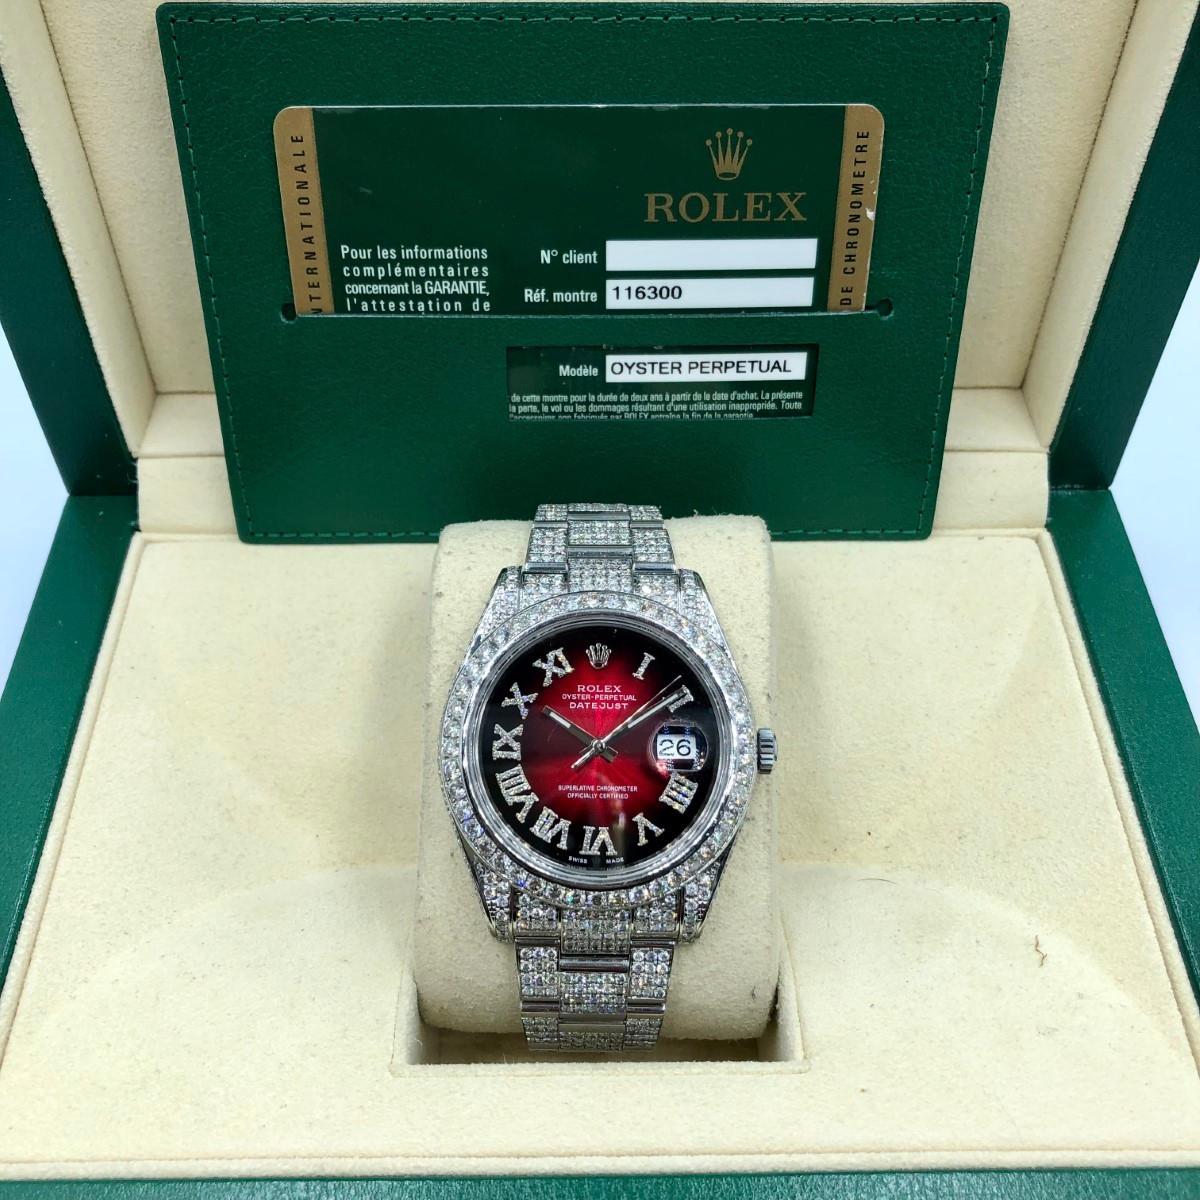 Rolex Mens Datejust II 41mm 116300 Stainless Steel Red Vignette Roman Diamond Dial Fully Iced Out Watch from 2012.

Brand: Rolex
Series: Datejust II
Model: 116300
Gender: Men's
Watch label: Swiss Made
Movement: Automatic
Case Size: 40mm
Bracelet